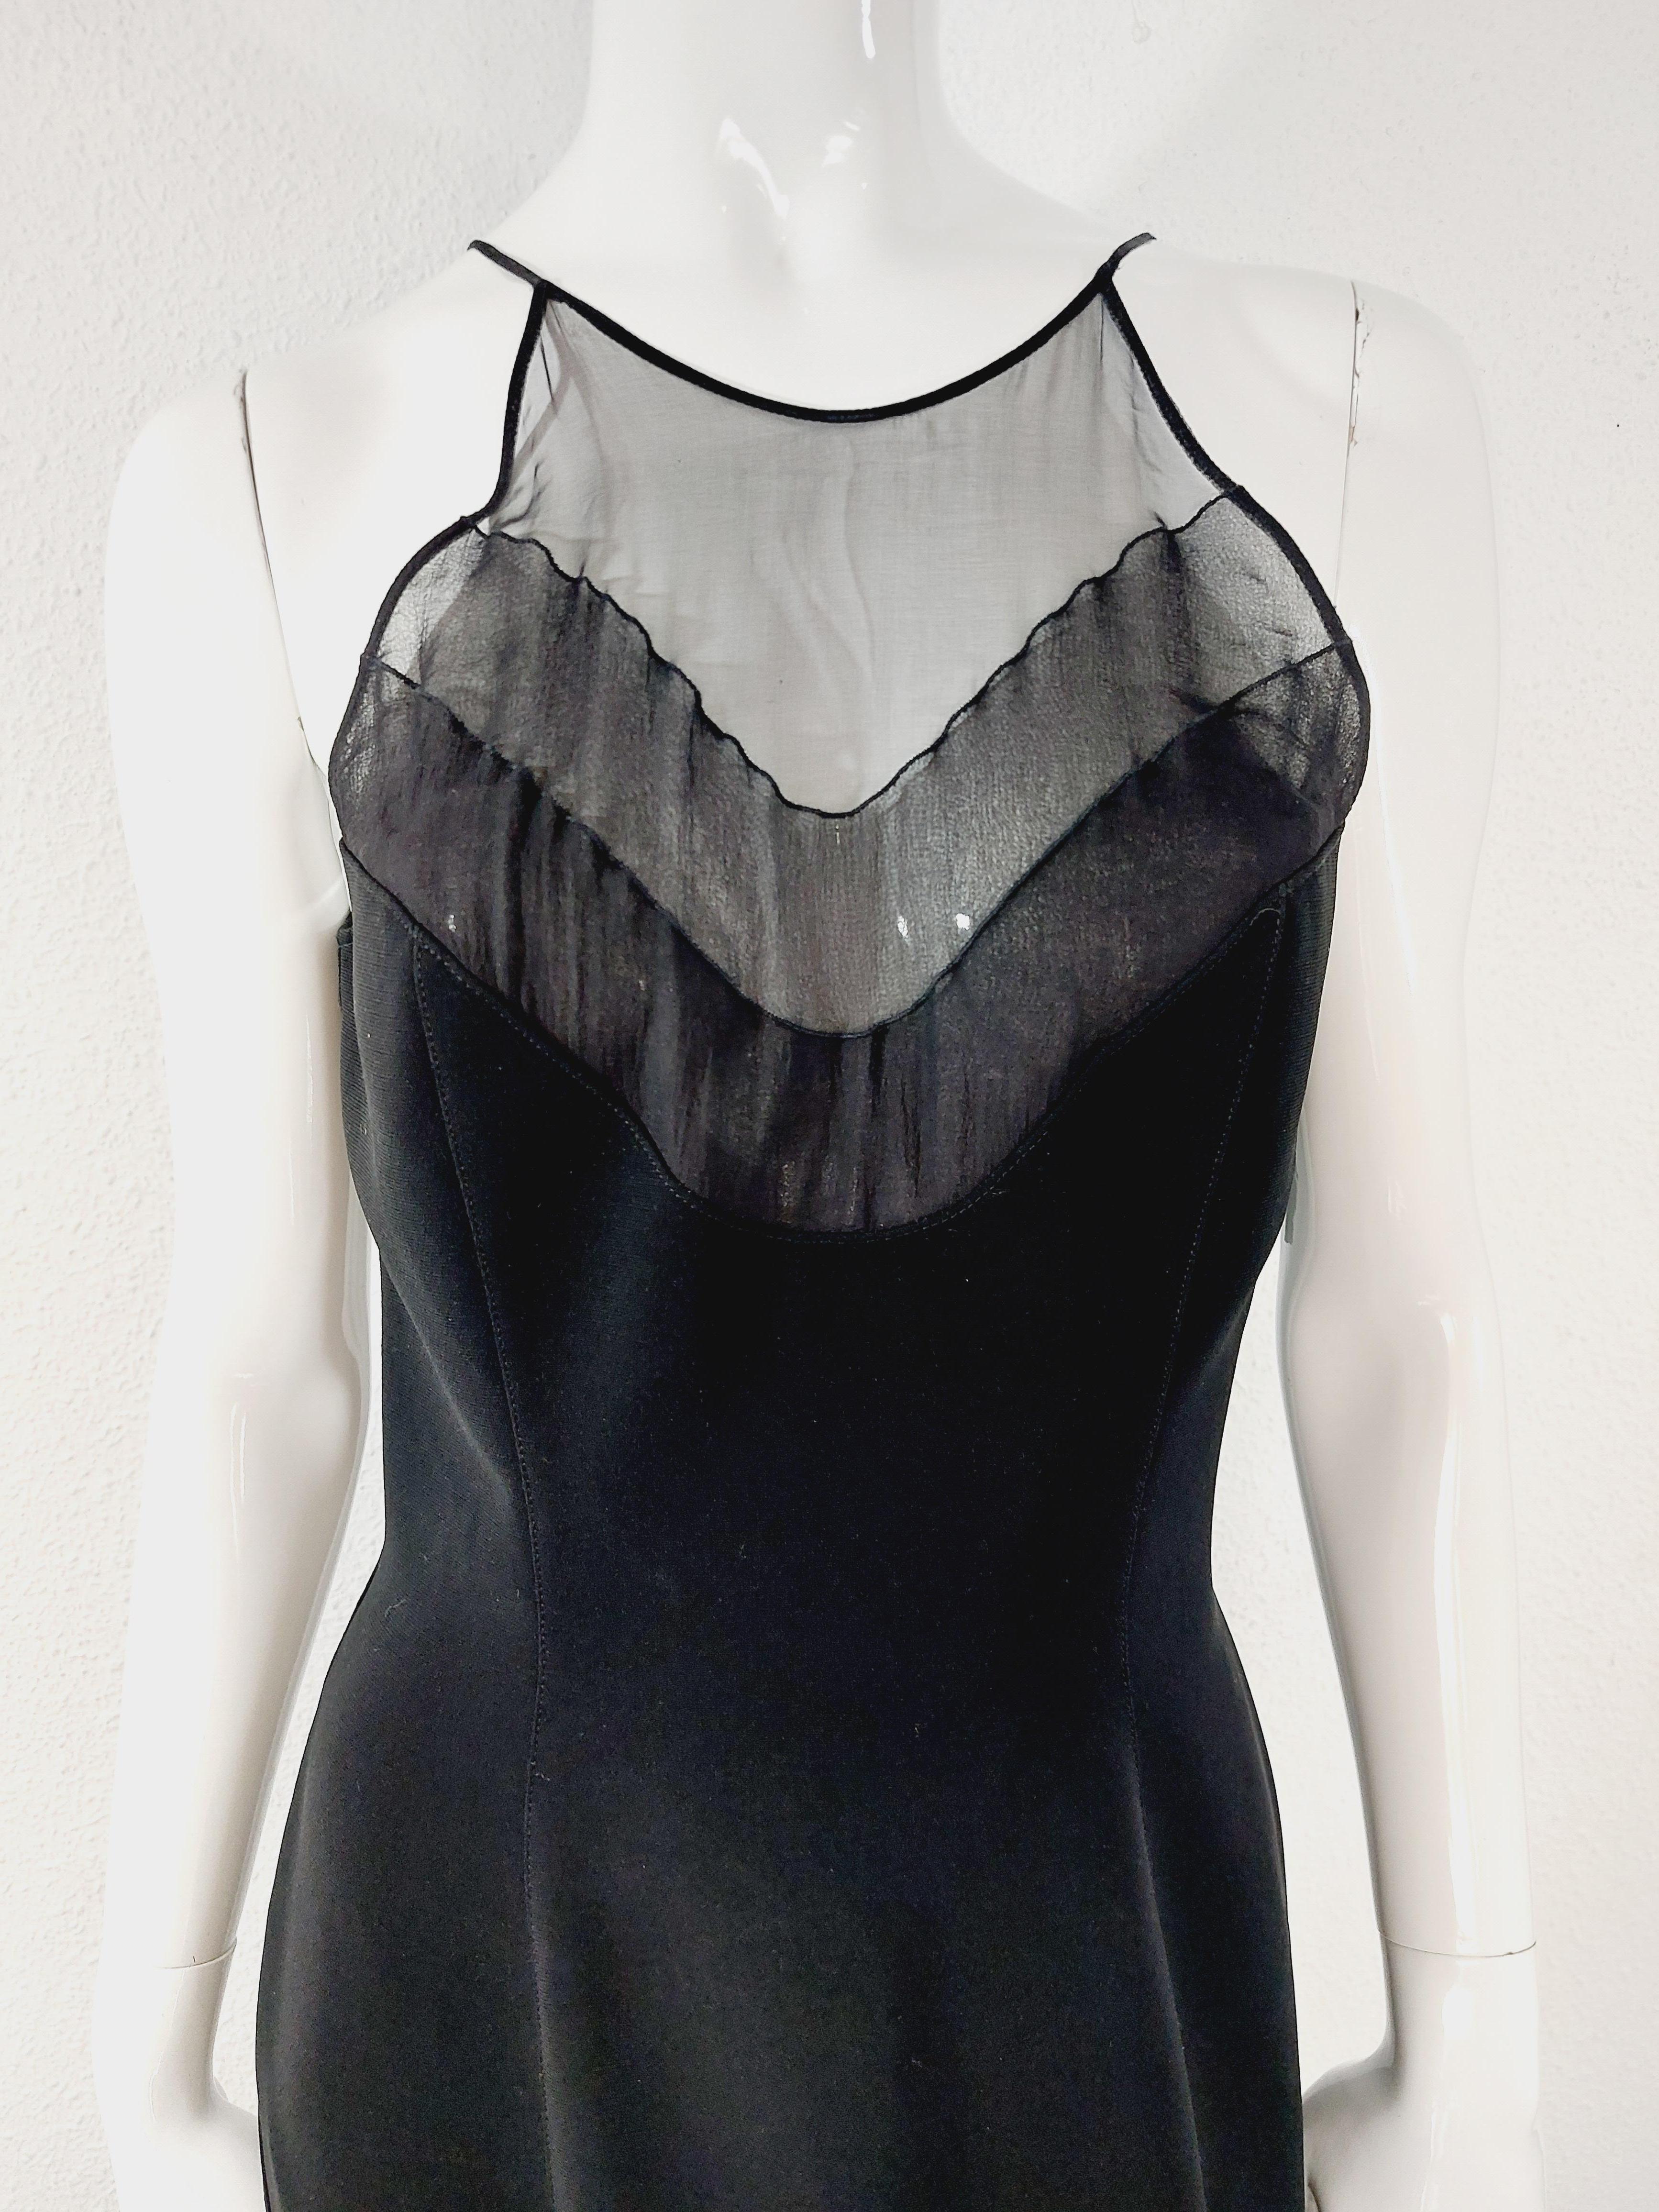 Thierry Mugler Black Elegant Mesh Transparent Formal Cocktail Evening Gown Split Maxi Dress
-	Transparent/mesh upper part
-	Split ont he side
-	Polyester & Silk
-	
Very Good Condition.
Marked 38, firs for XS/S. Please check the measurements.

Ampit